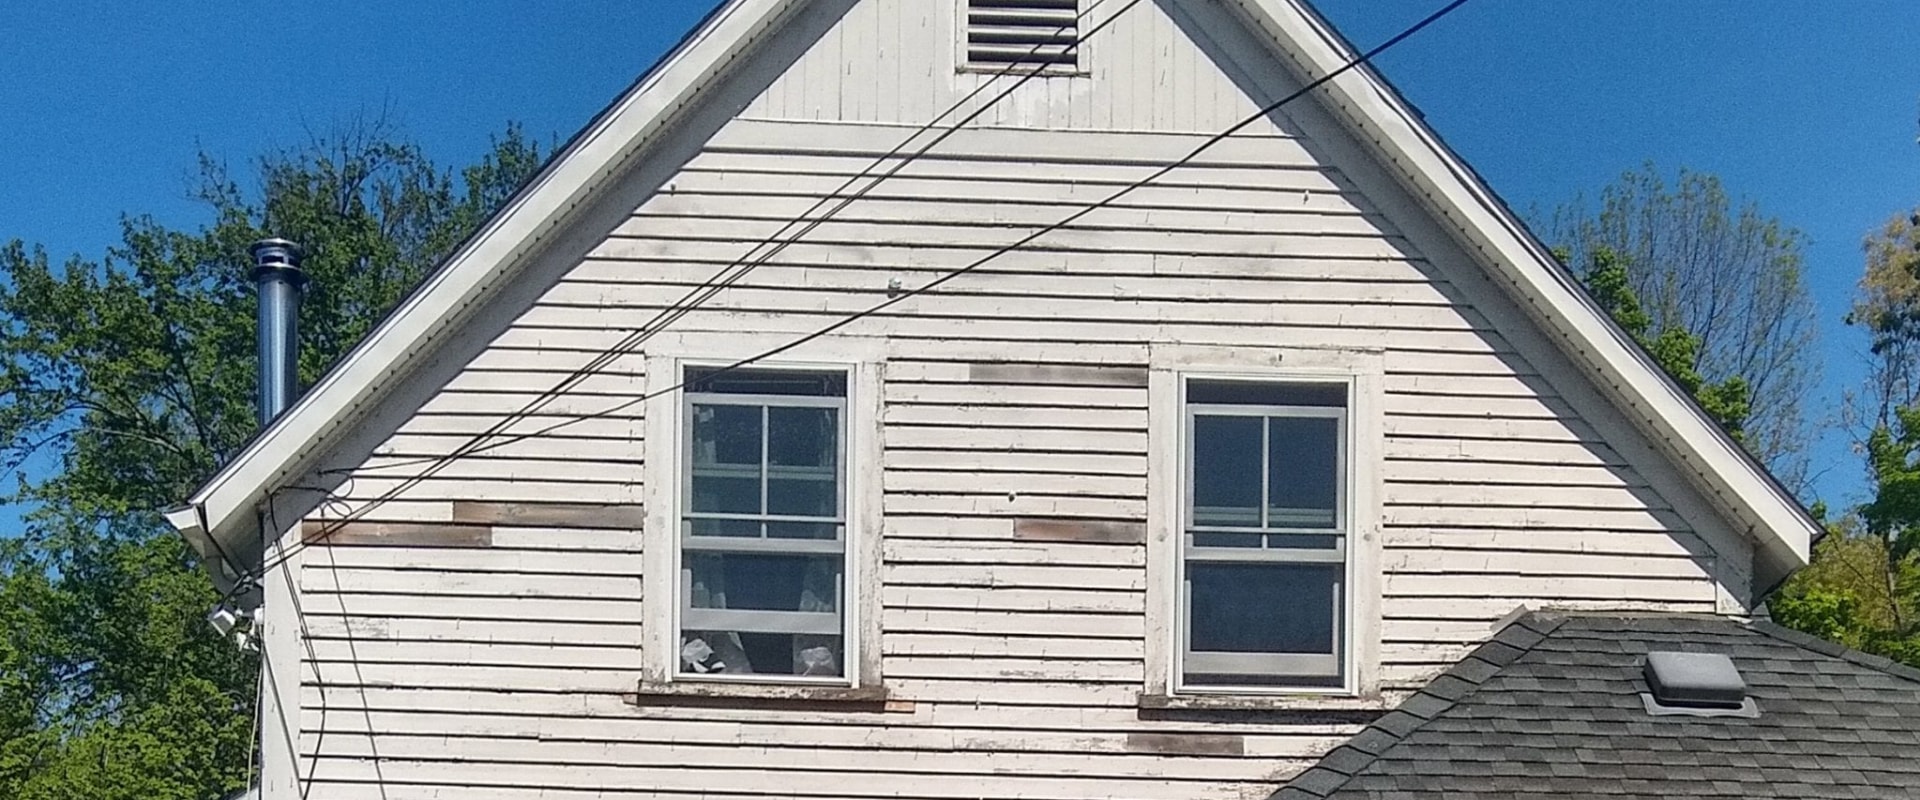 Why vinyl siding is better than wood?